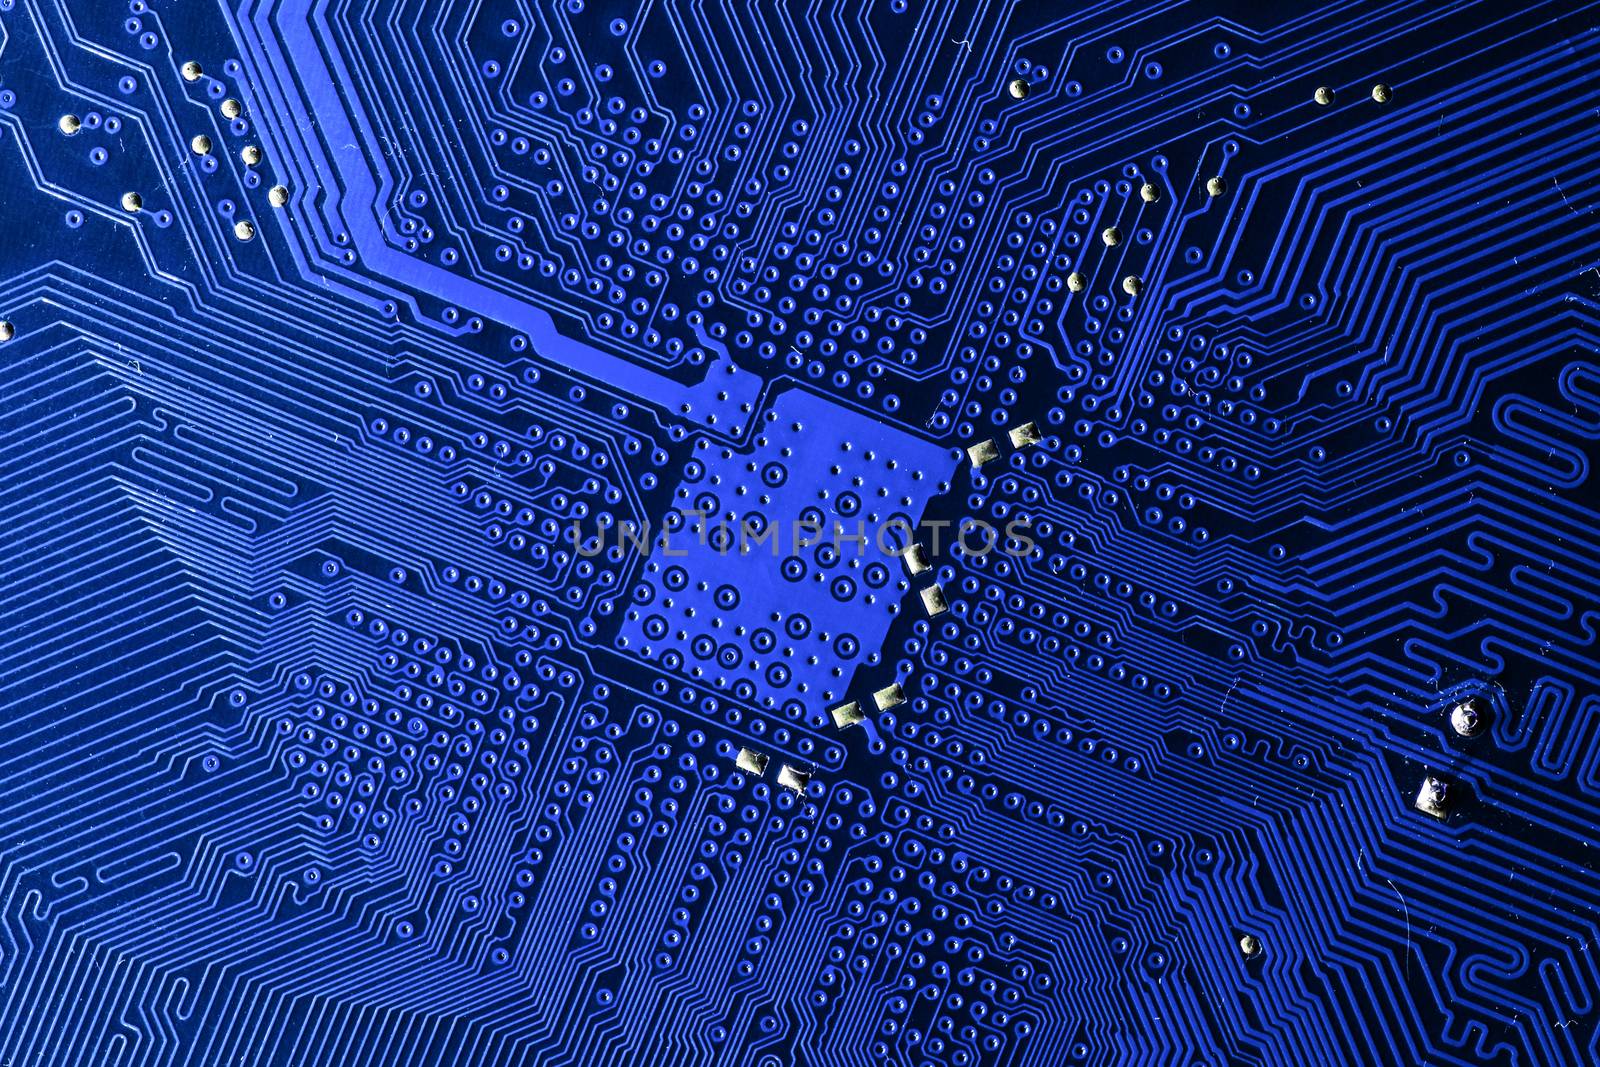 Close up photo of blue printecd circuit board with solder points